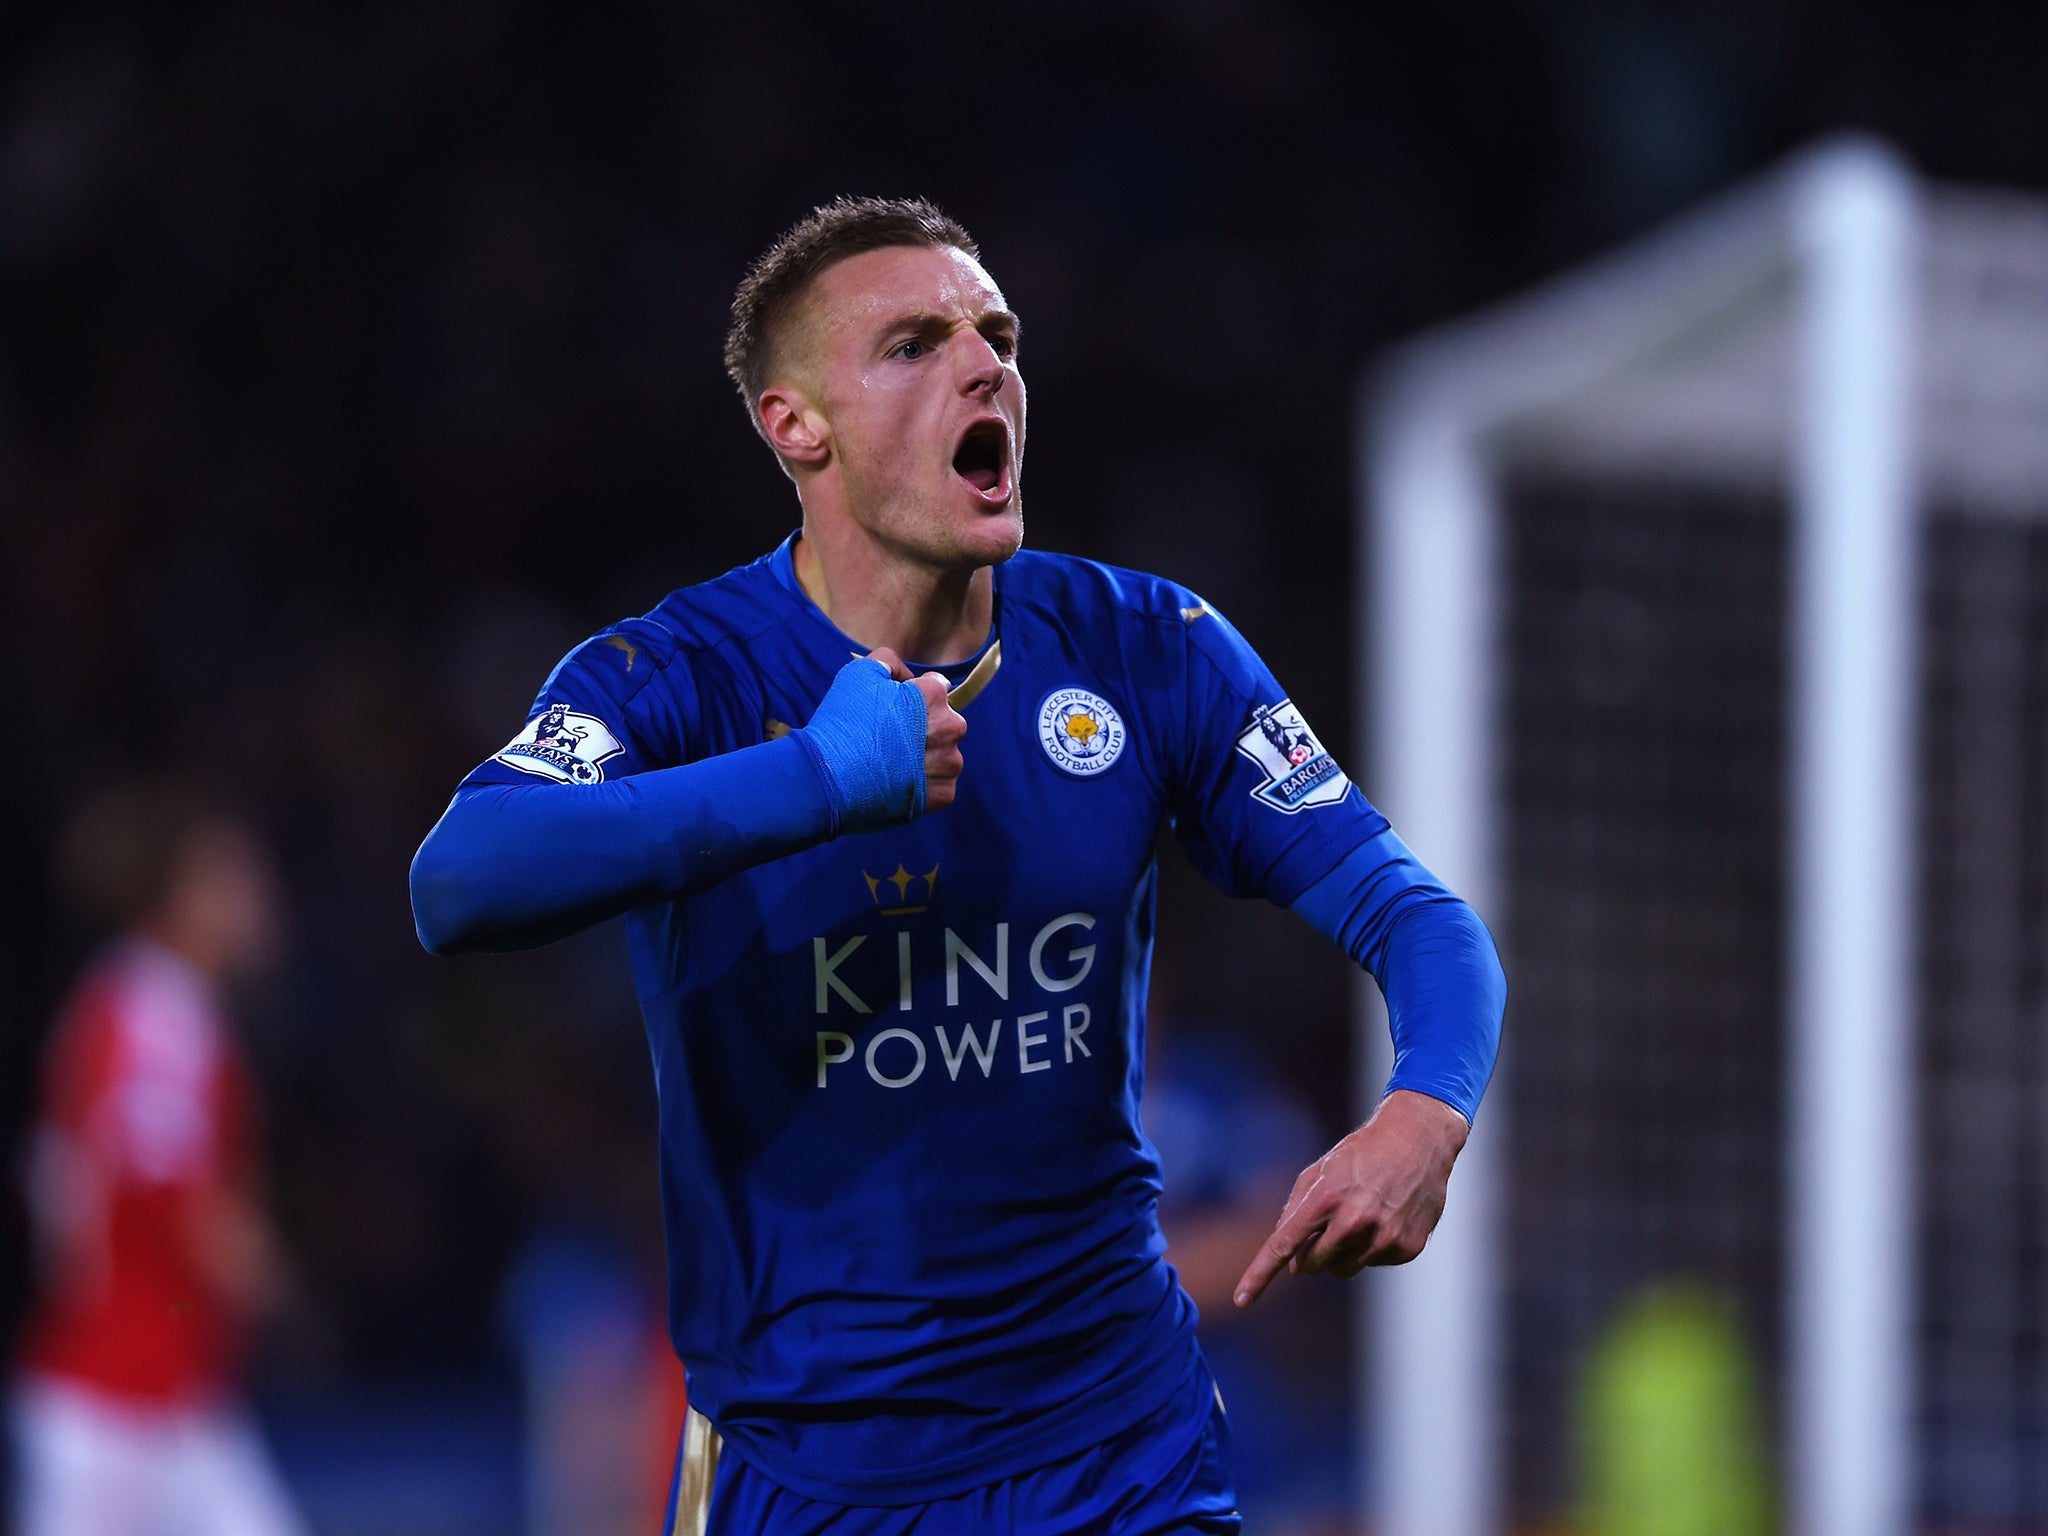 Jamie Vardy has scored 15 Premier League goals for the Foxes this season